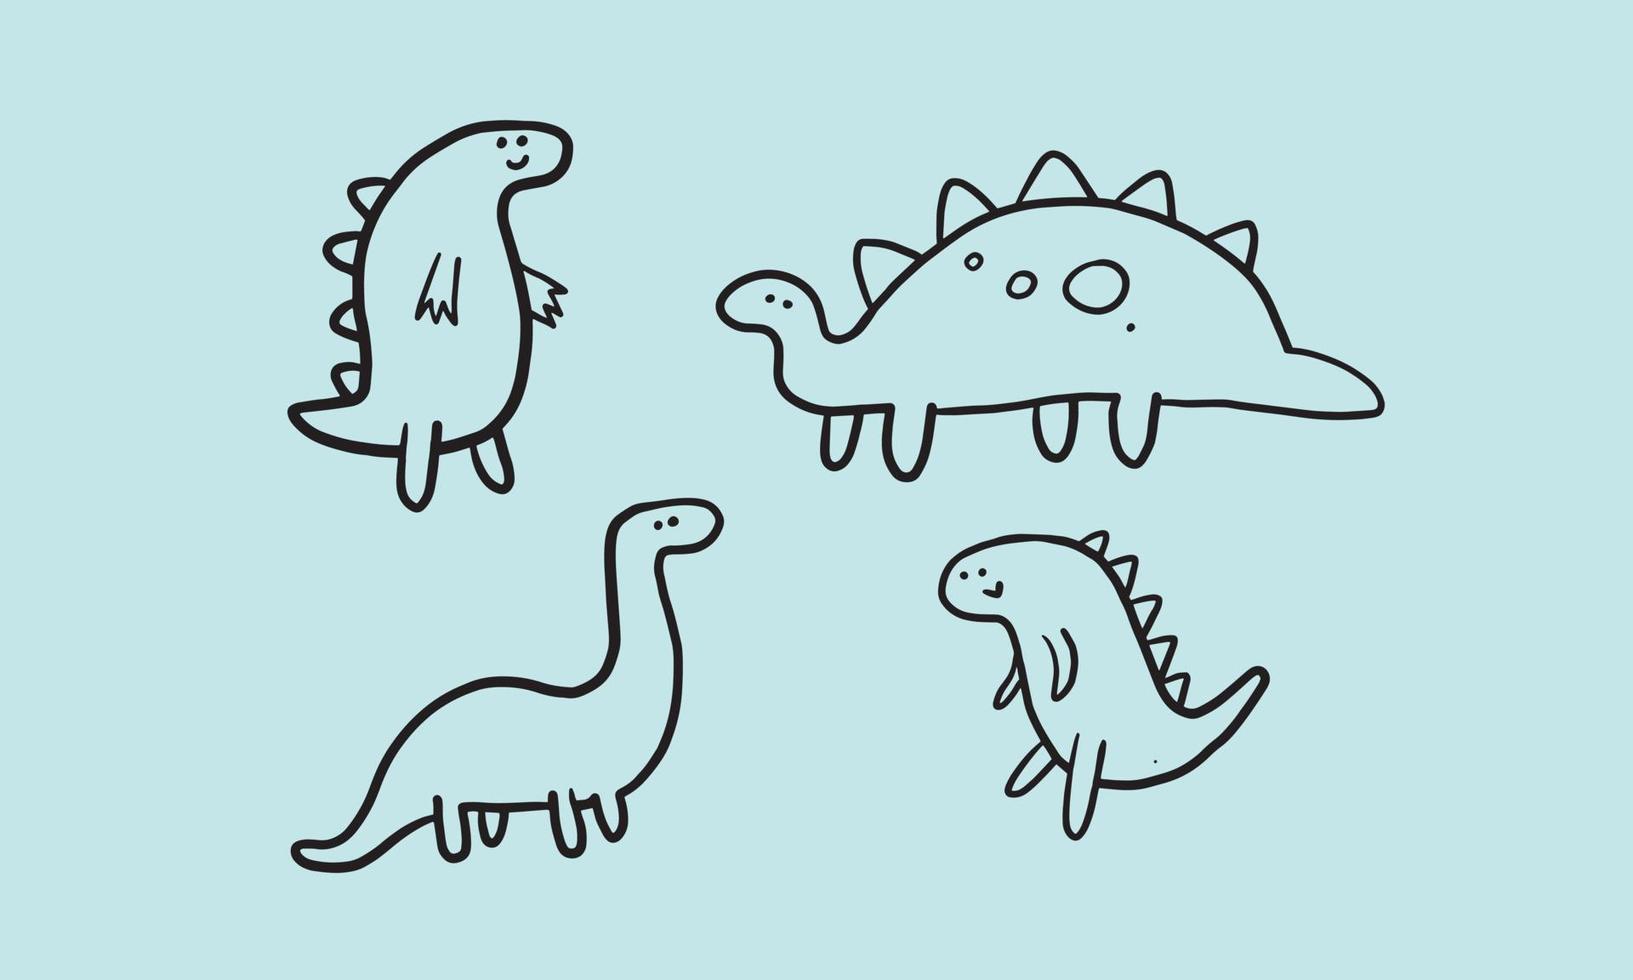 set of cute dino illustrations. simple and minimal design for kids. funny element for creating campaigns or posters for kids. vector